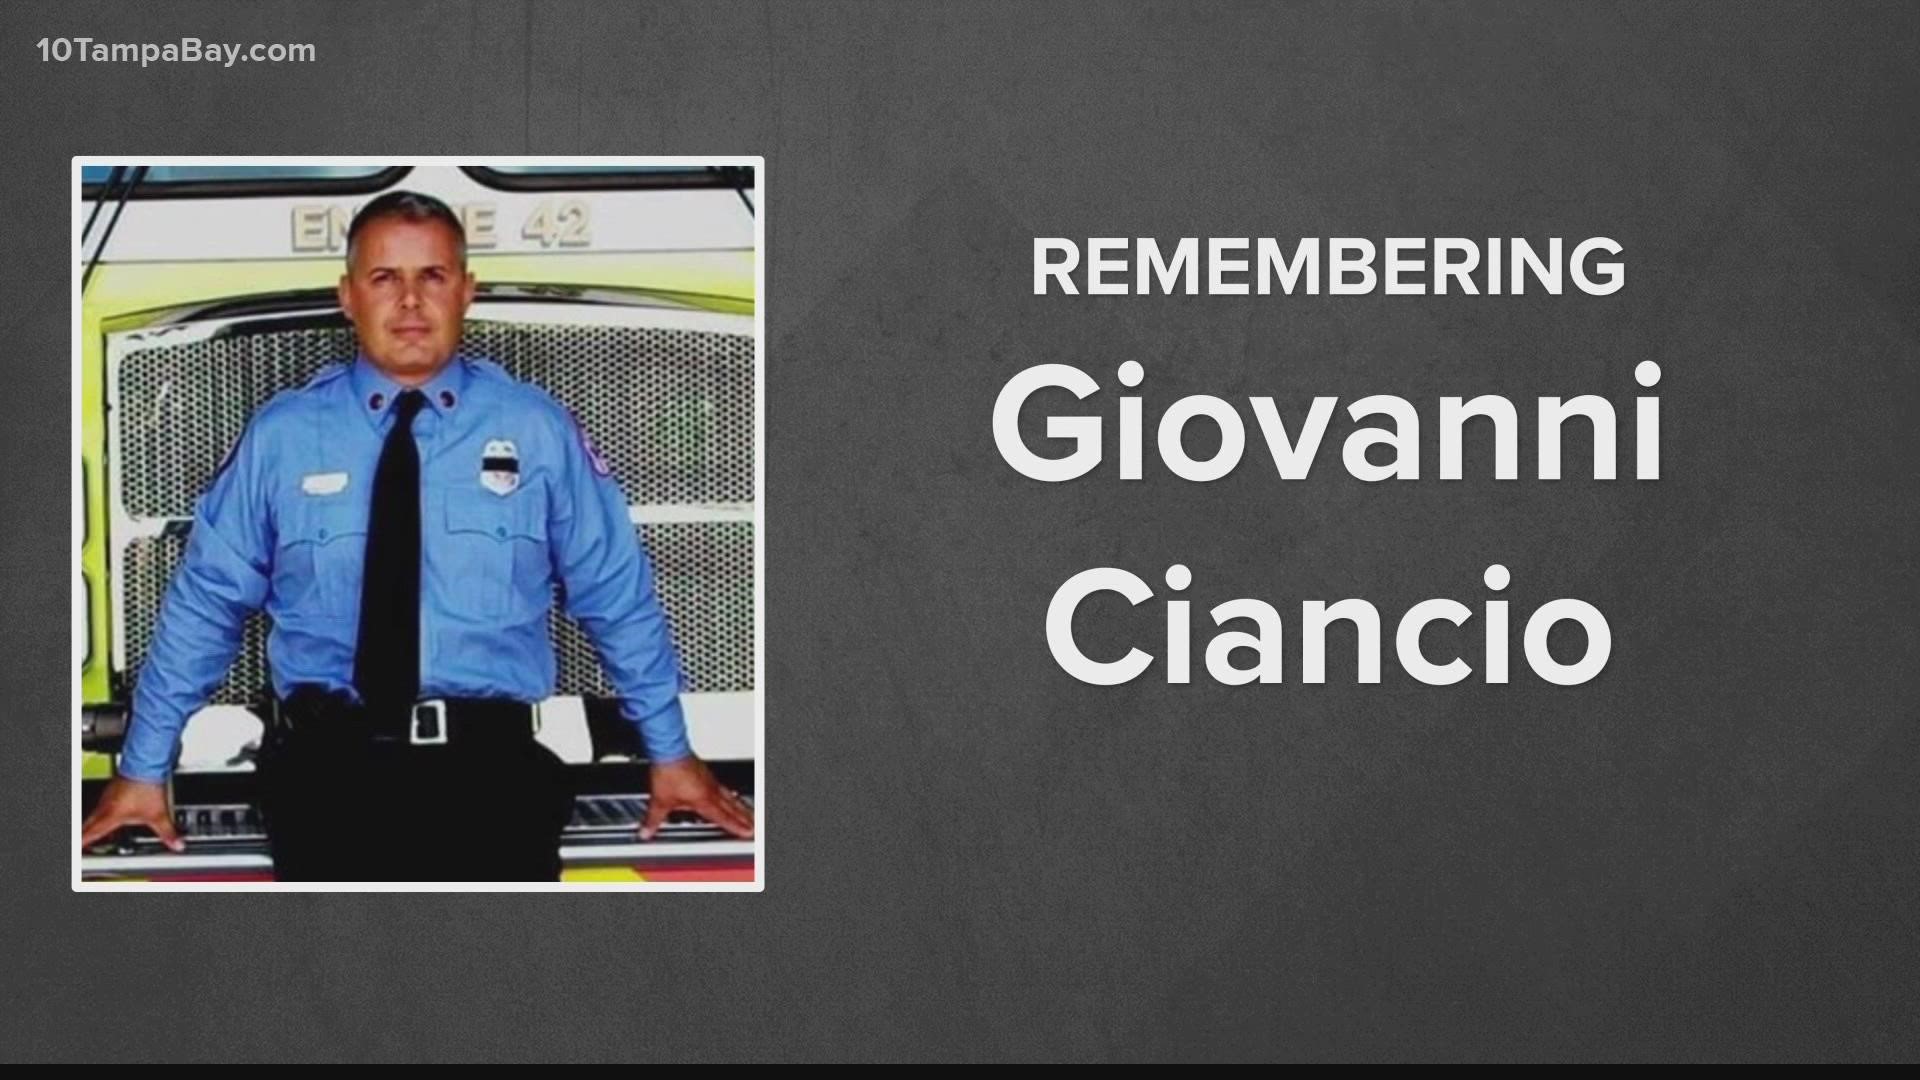 Giovanni Ciancio had worked for the department for more than 19 years.